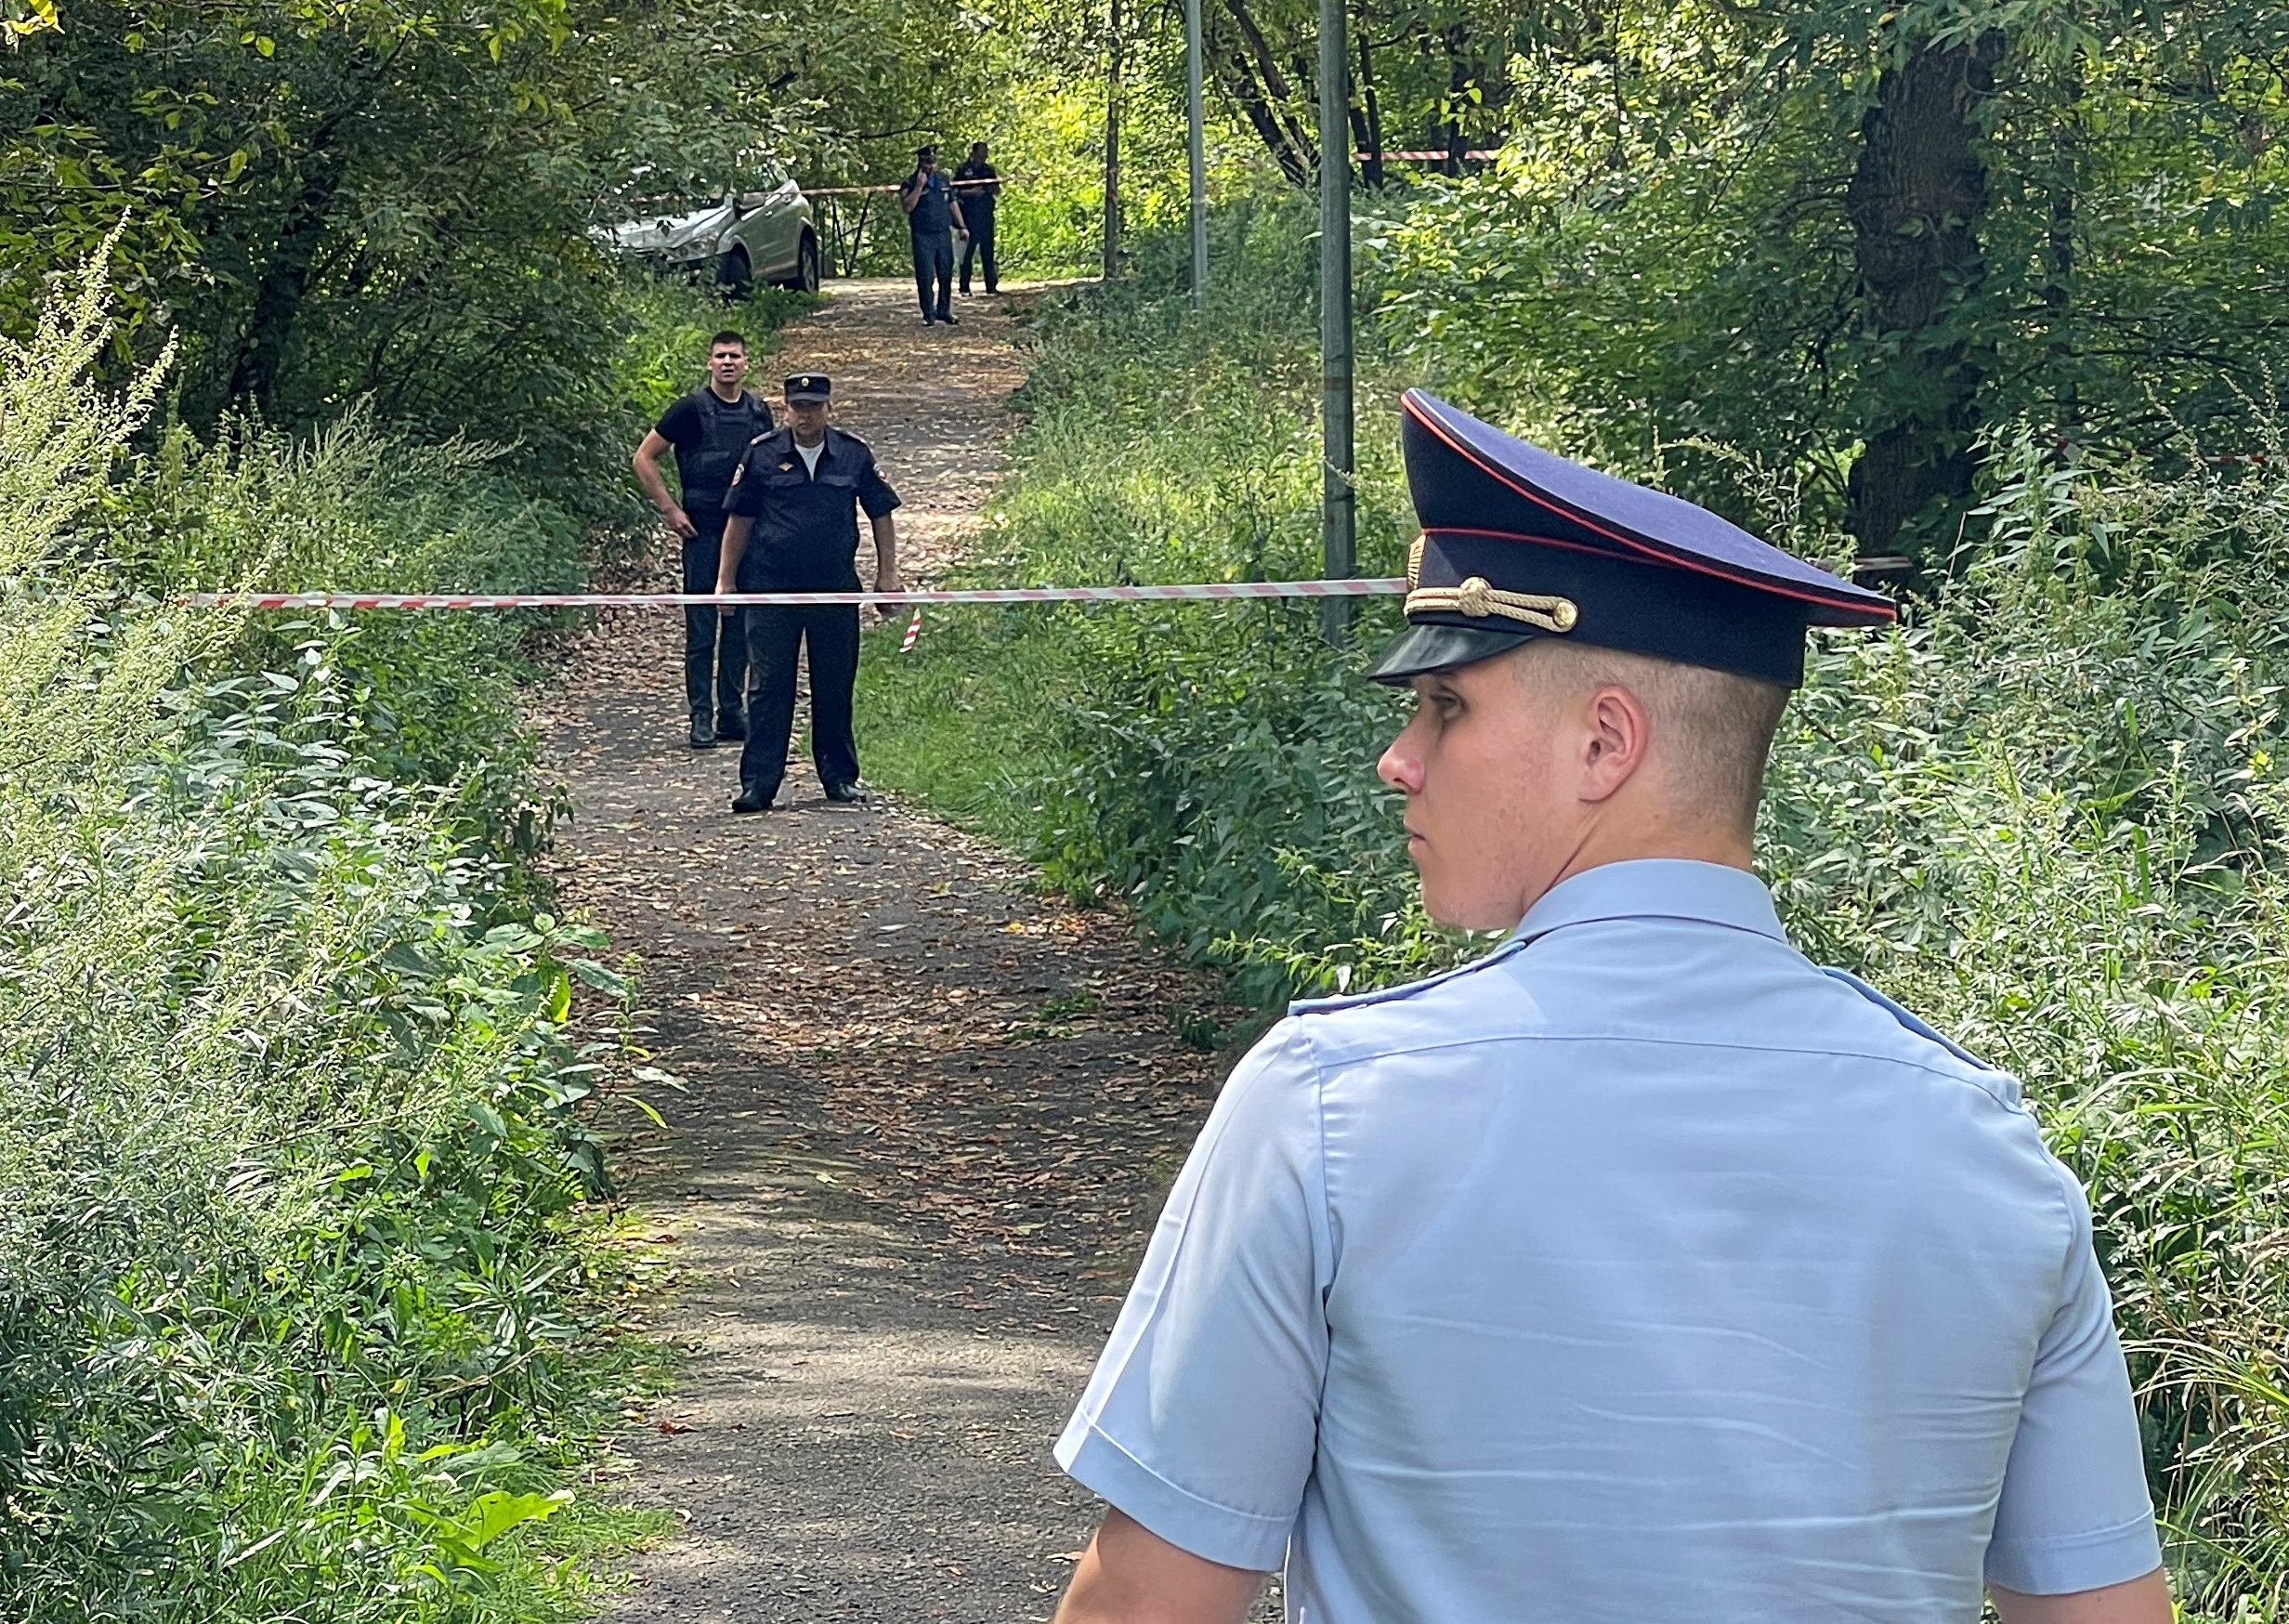 Russian law enforcement officers gather near the accident scene following a Ukrainian drone crash in Moscow. /Reuters